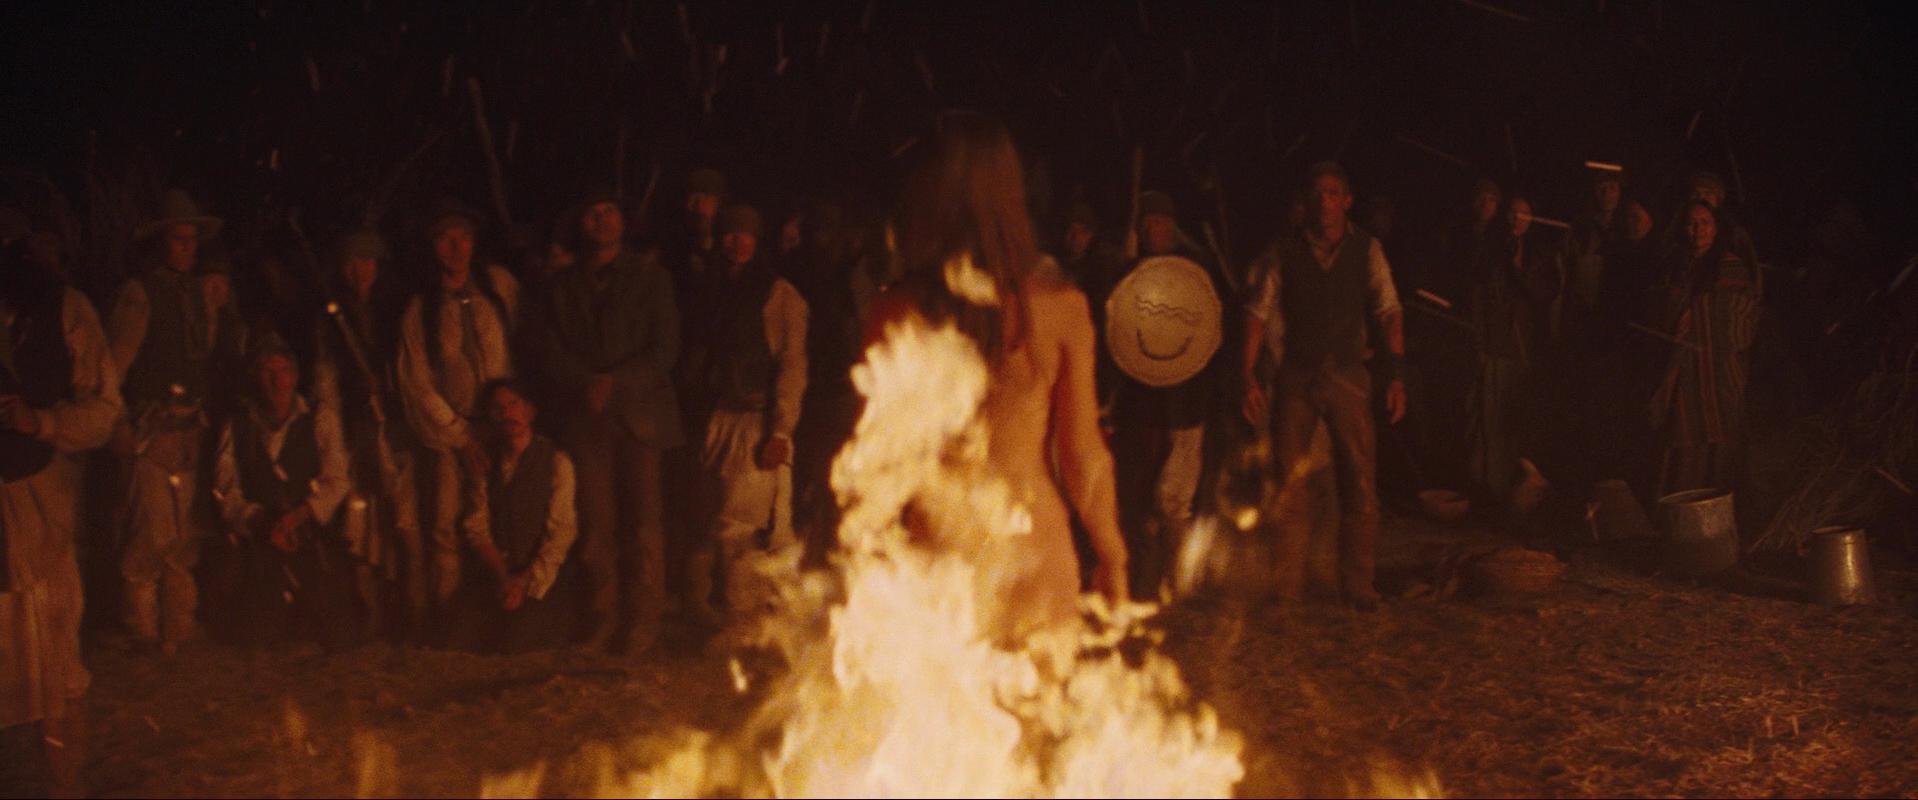 Olivia Wilde nude - Cowboys and Aliens (2011)